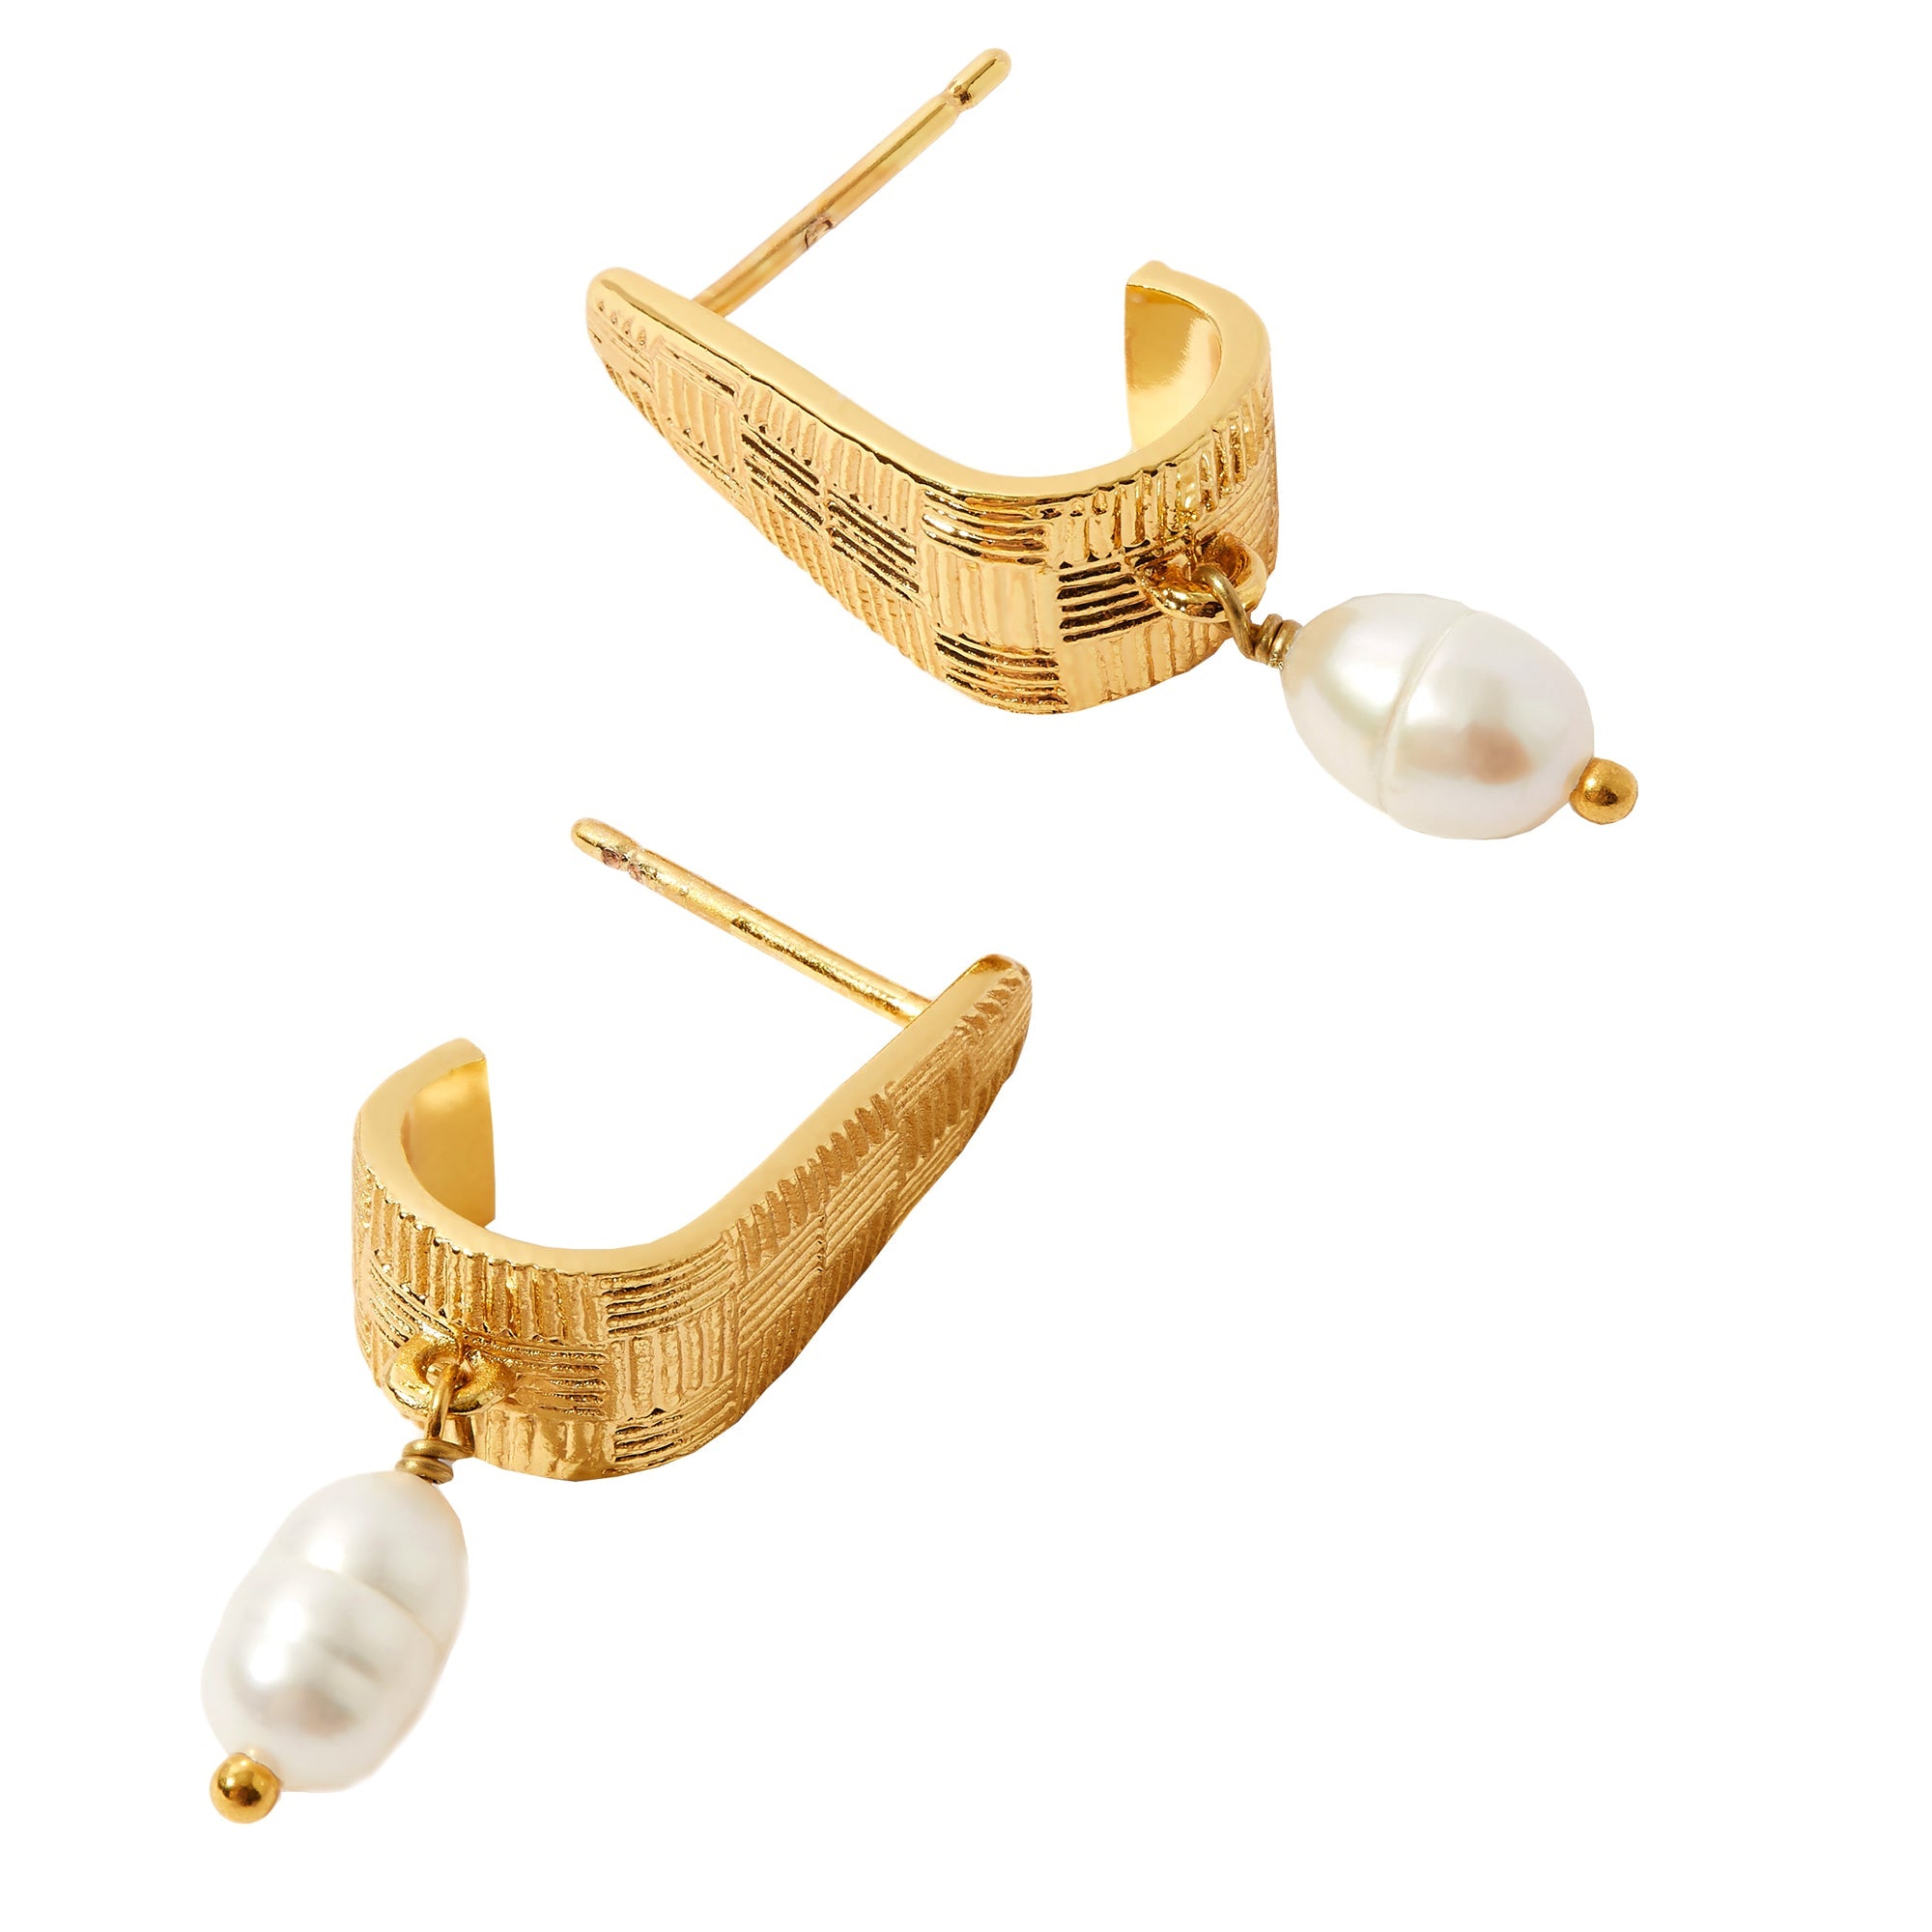 Real Gold Plated Z Grecian Pearl Drop Earrings For Women By Accessorize London